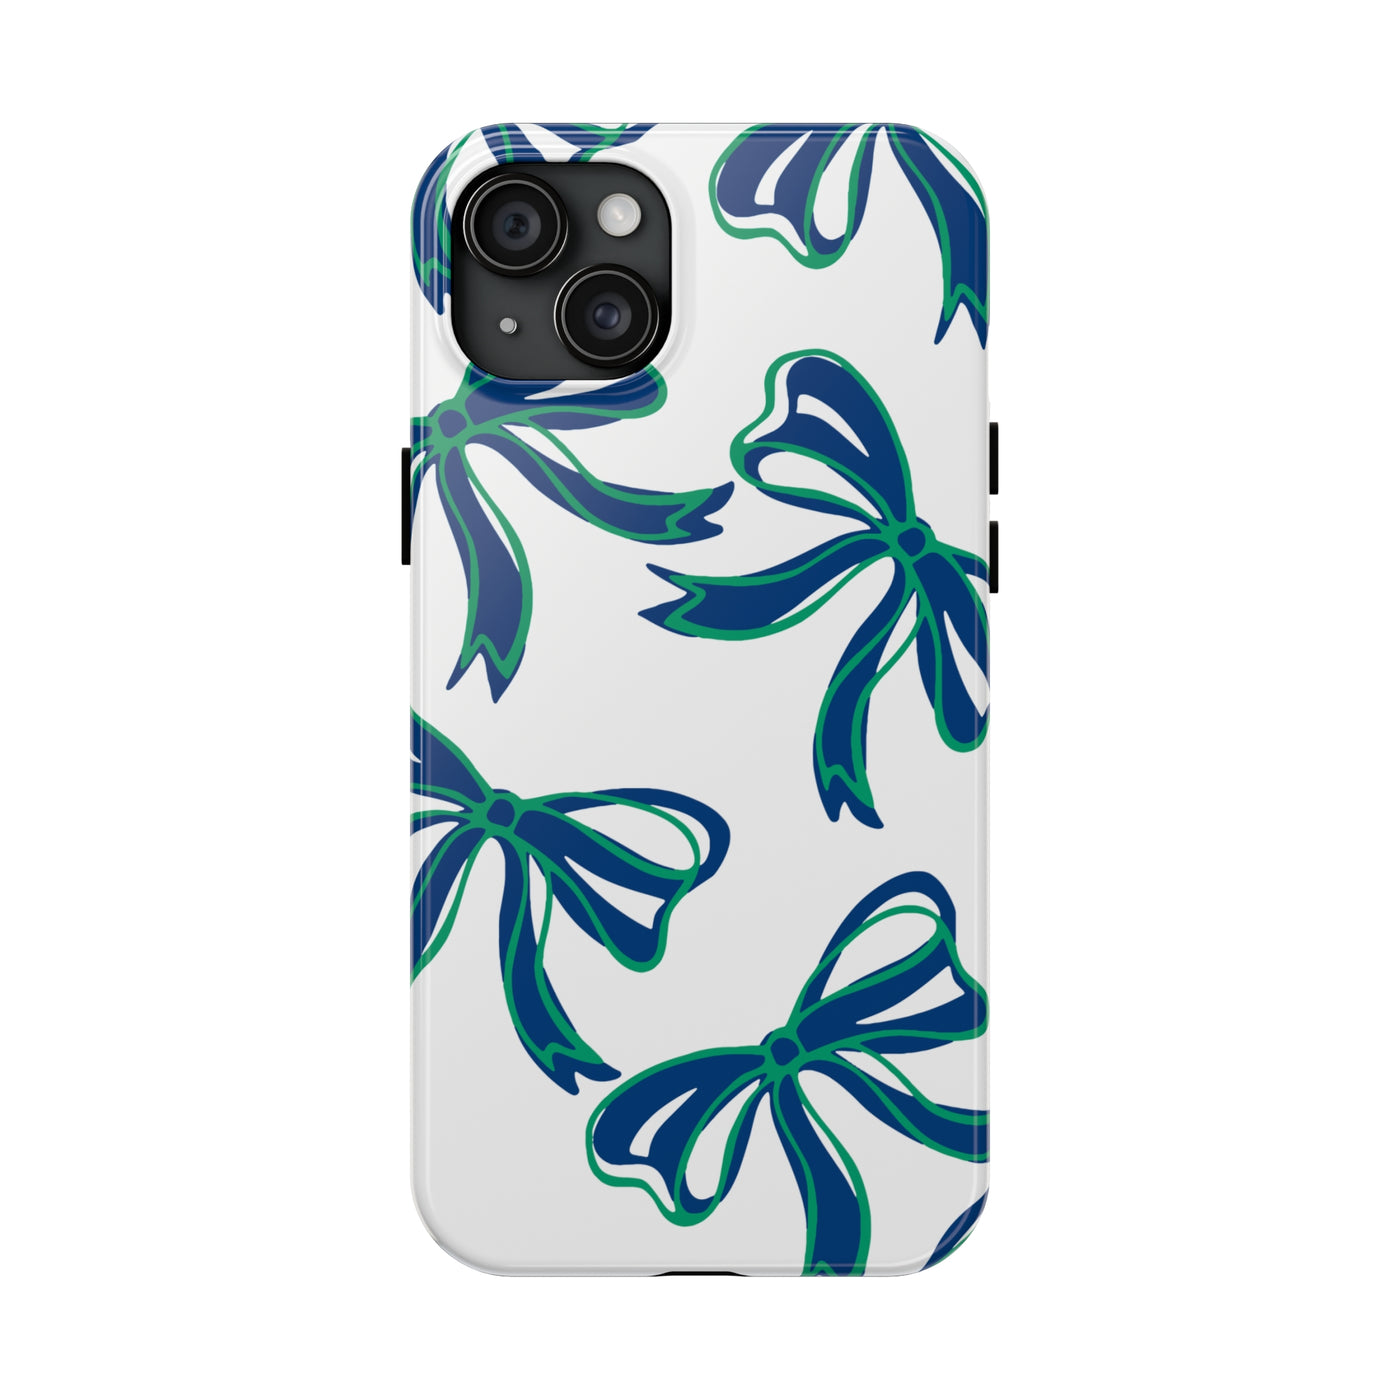 Trendy Bow Phone Case, Bed Party Bow Iphone case, Bow Phone Case, - FGCU, Blue and Green, Florida Gulf Coast